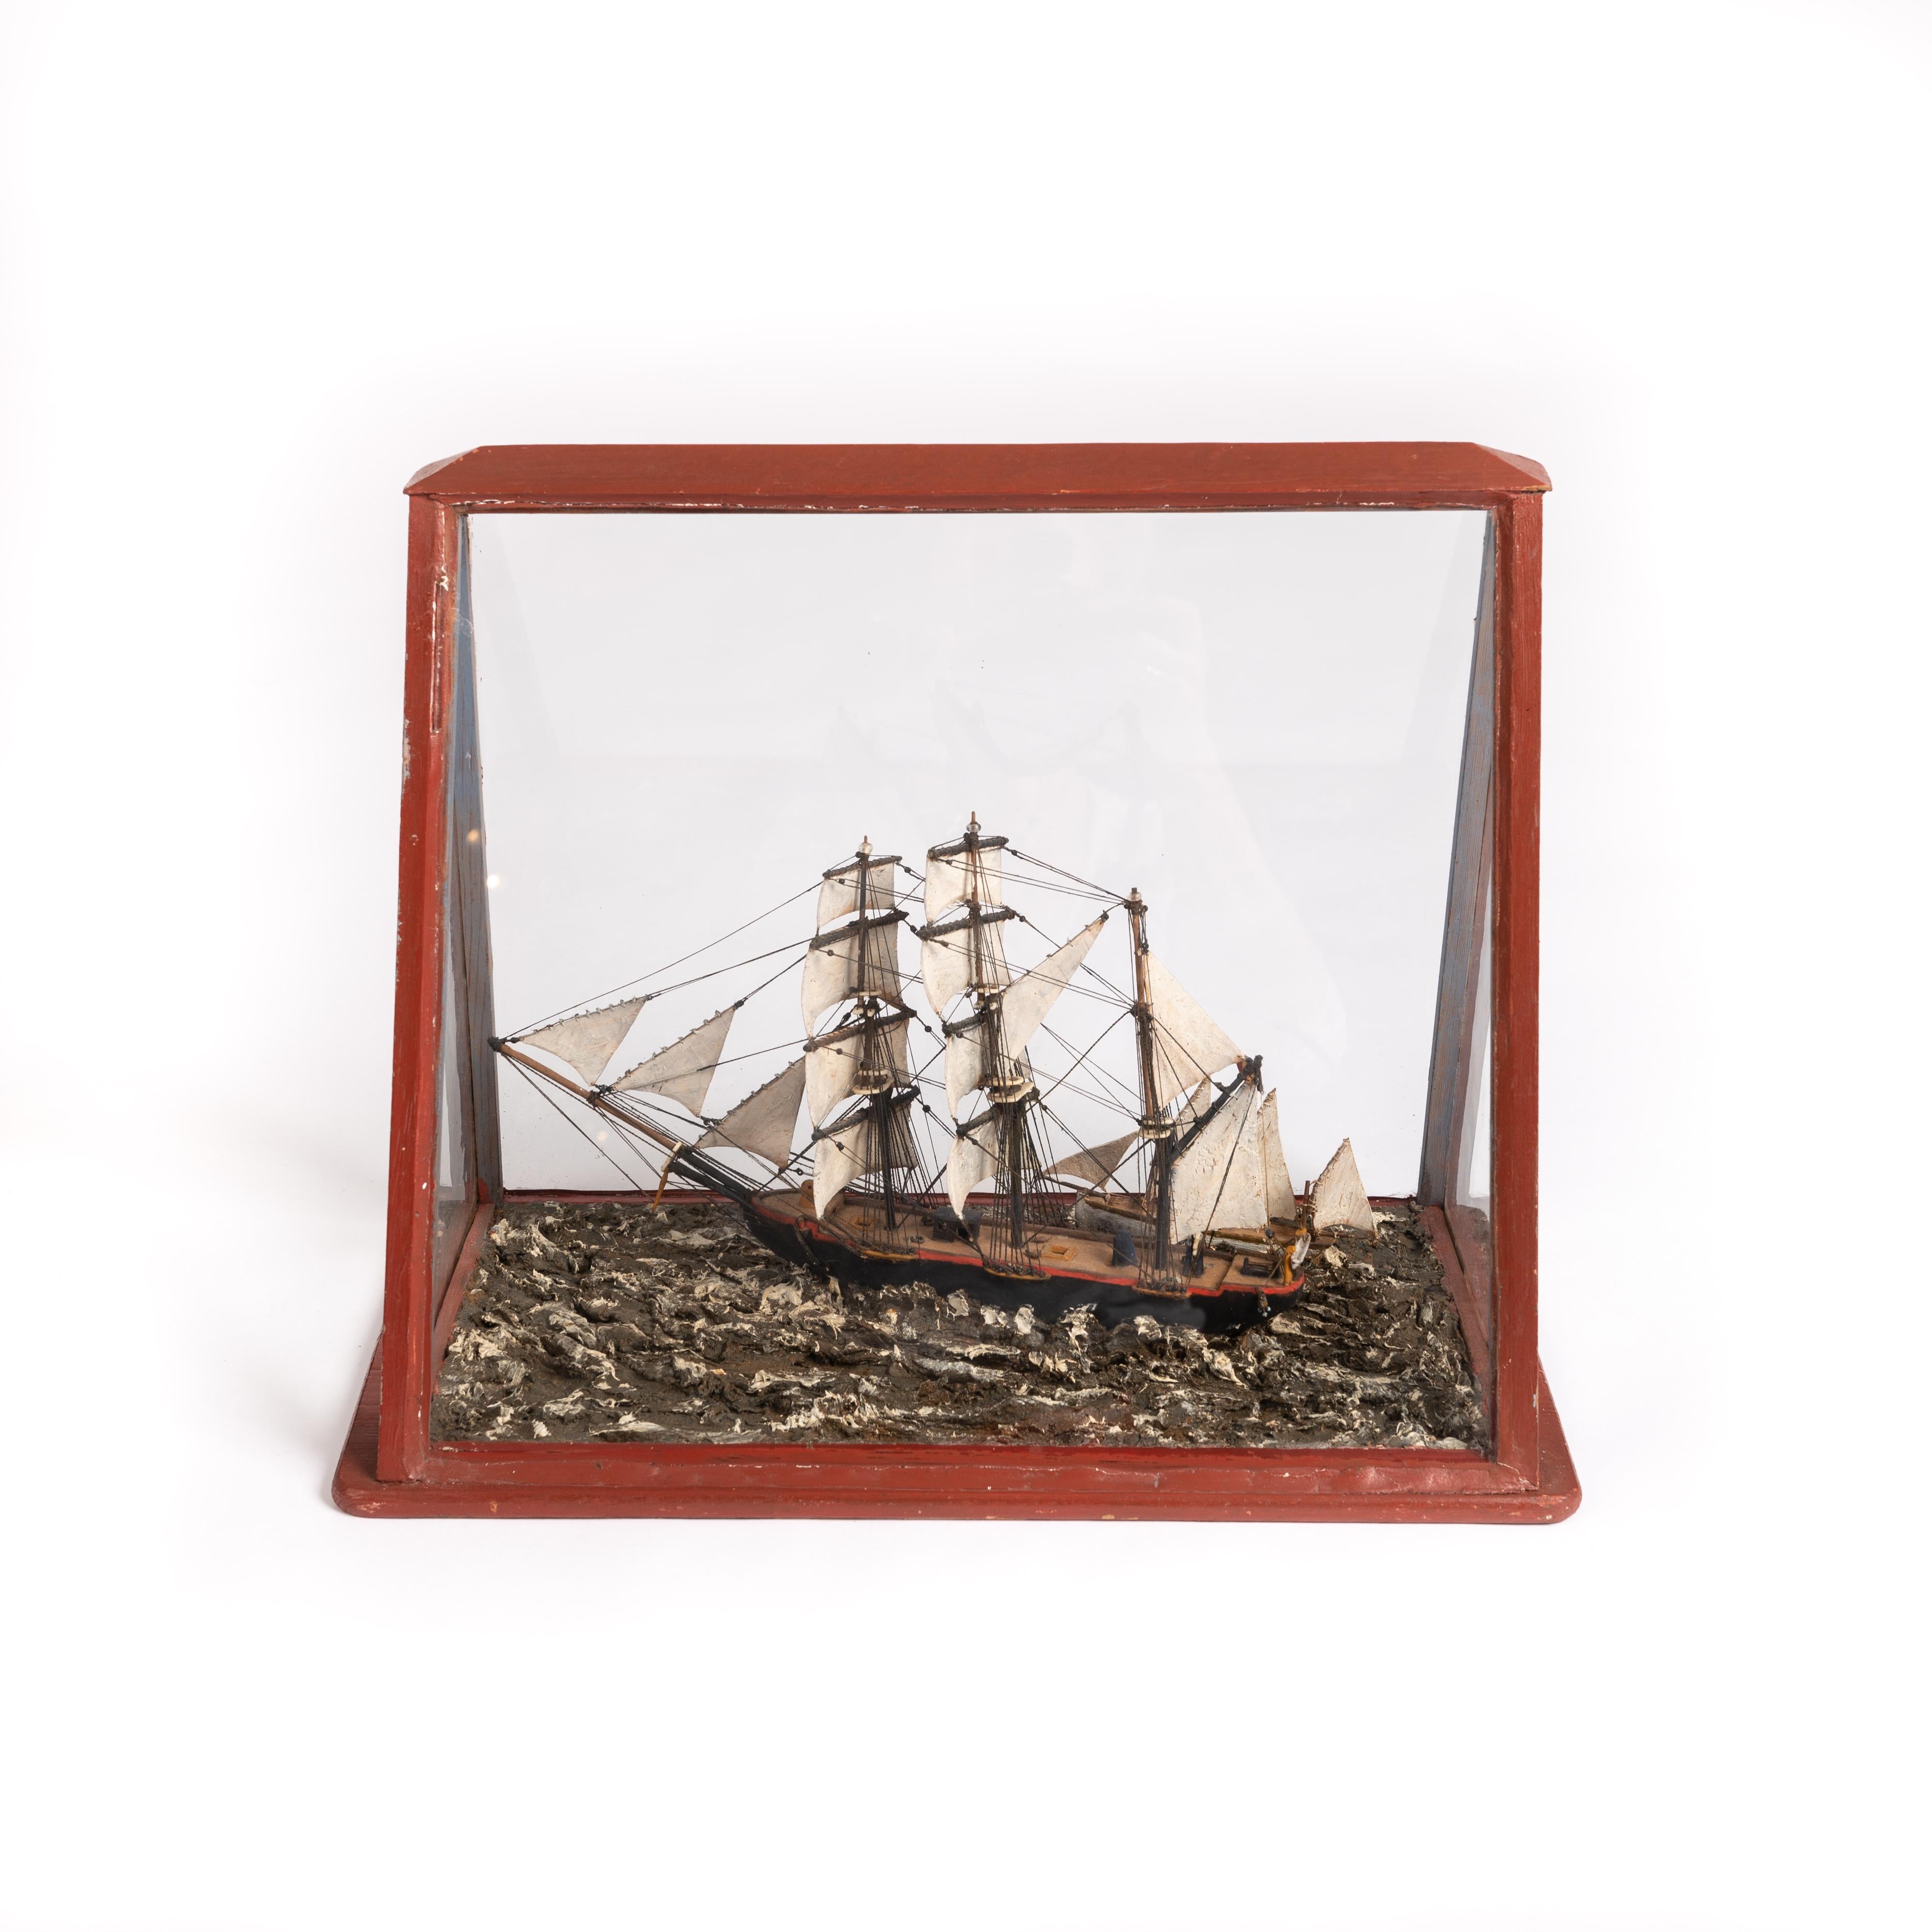 Nautical display in showcase France beginning 20th century.
The object is finely handcrafted from wood, plaster, fabric and paint. It shows an antique sailing ship on the high seas. 
Unusual about the object is the red trapezoidal